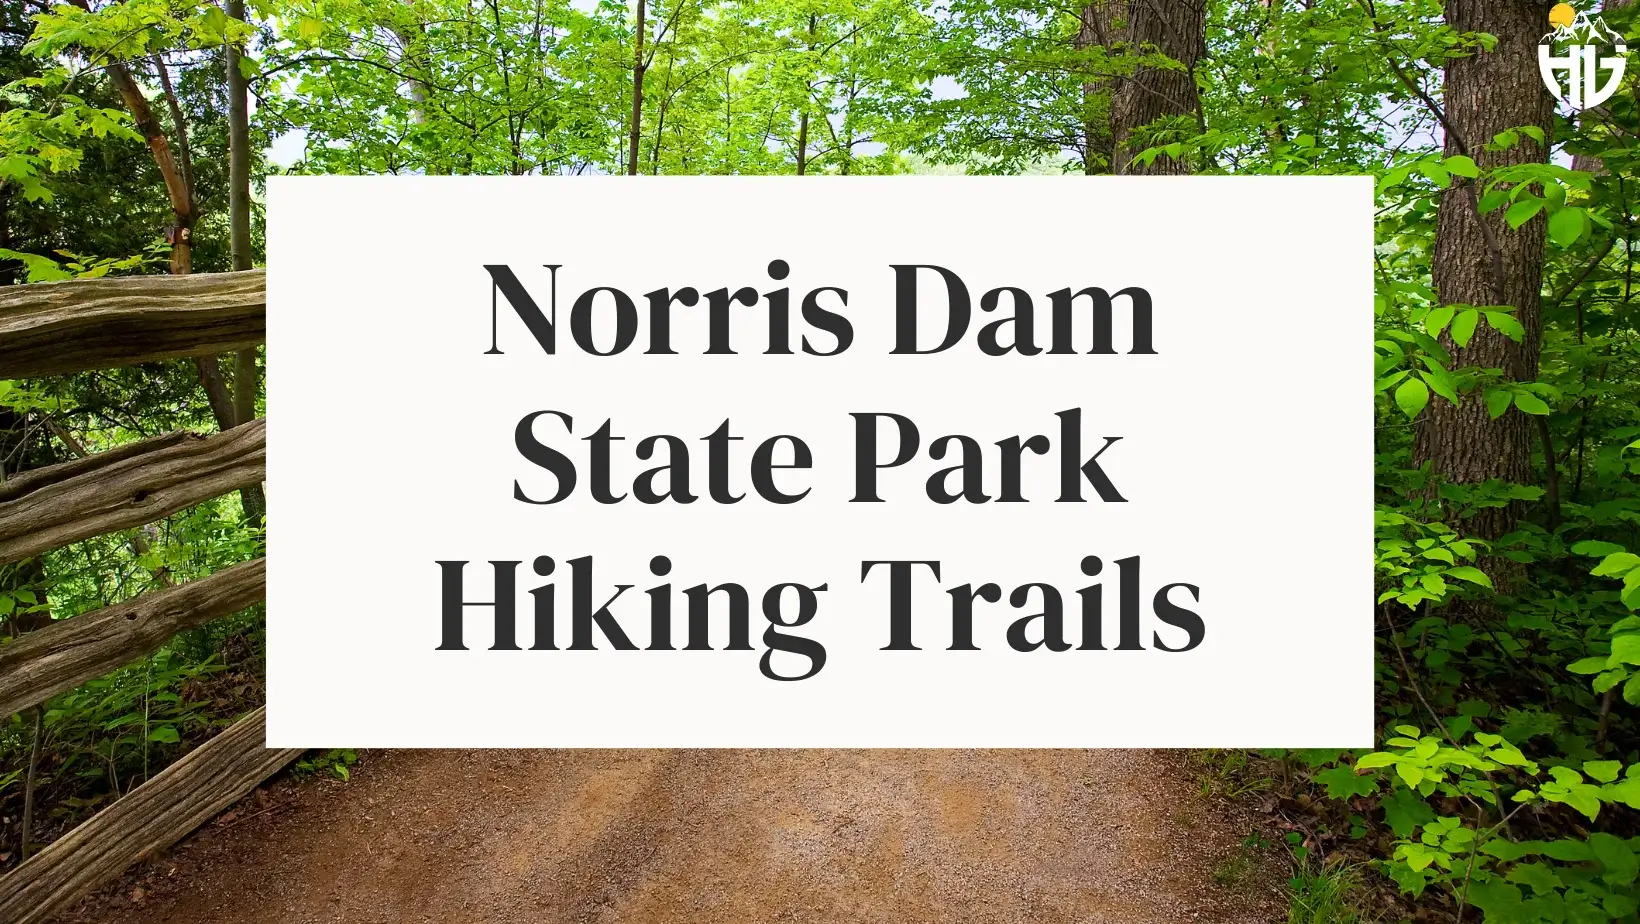 Norris Dam State Park Hiking Trails